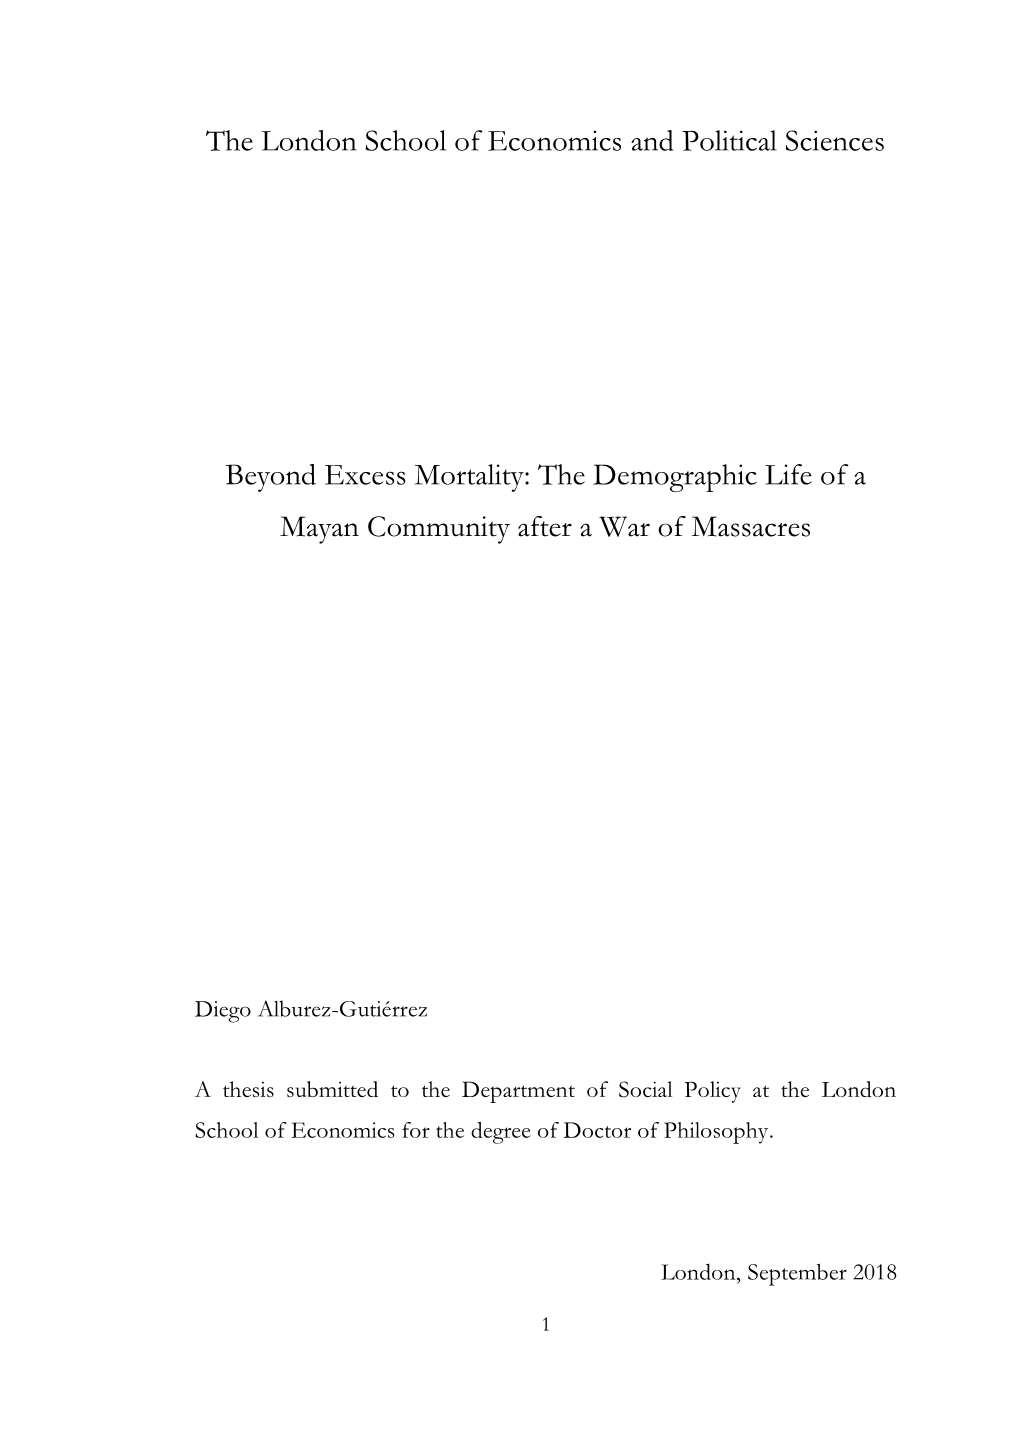 The London School of Economics and Political Sciences Beyond Excess Mortality: the Demographic Life of a Mayan Community After A